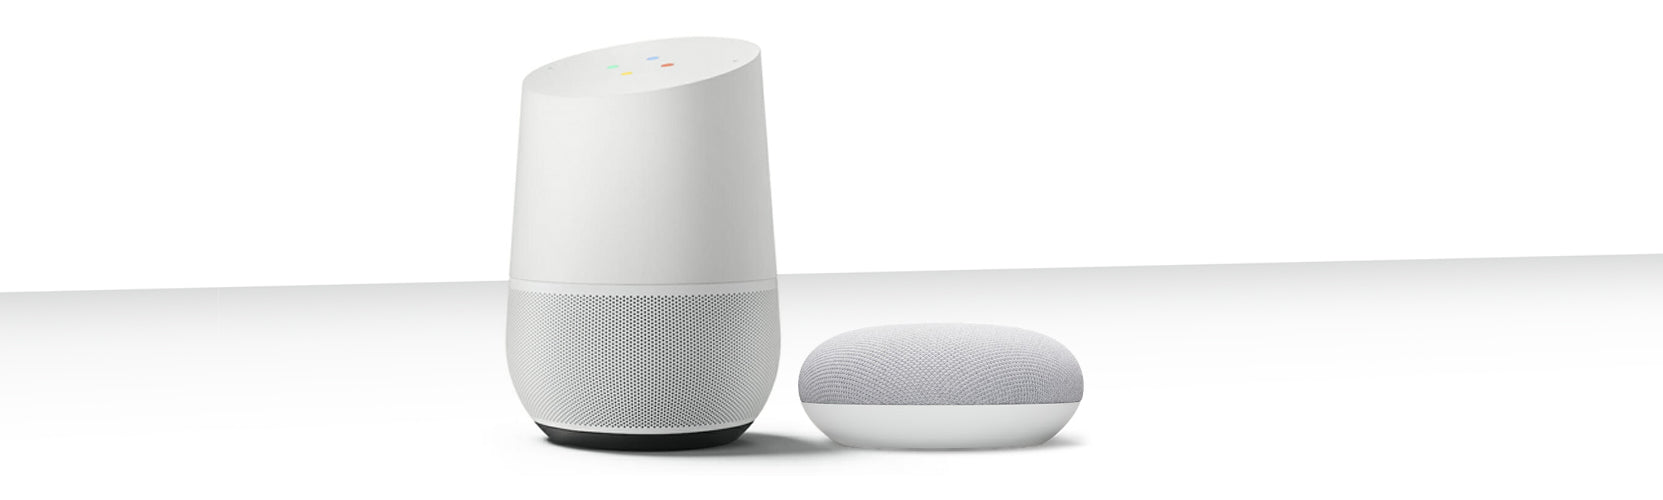 Google's Smart Home Devices: What's the Difference?